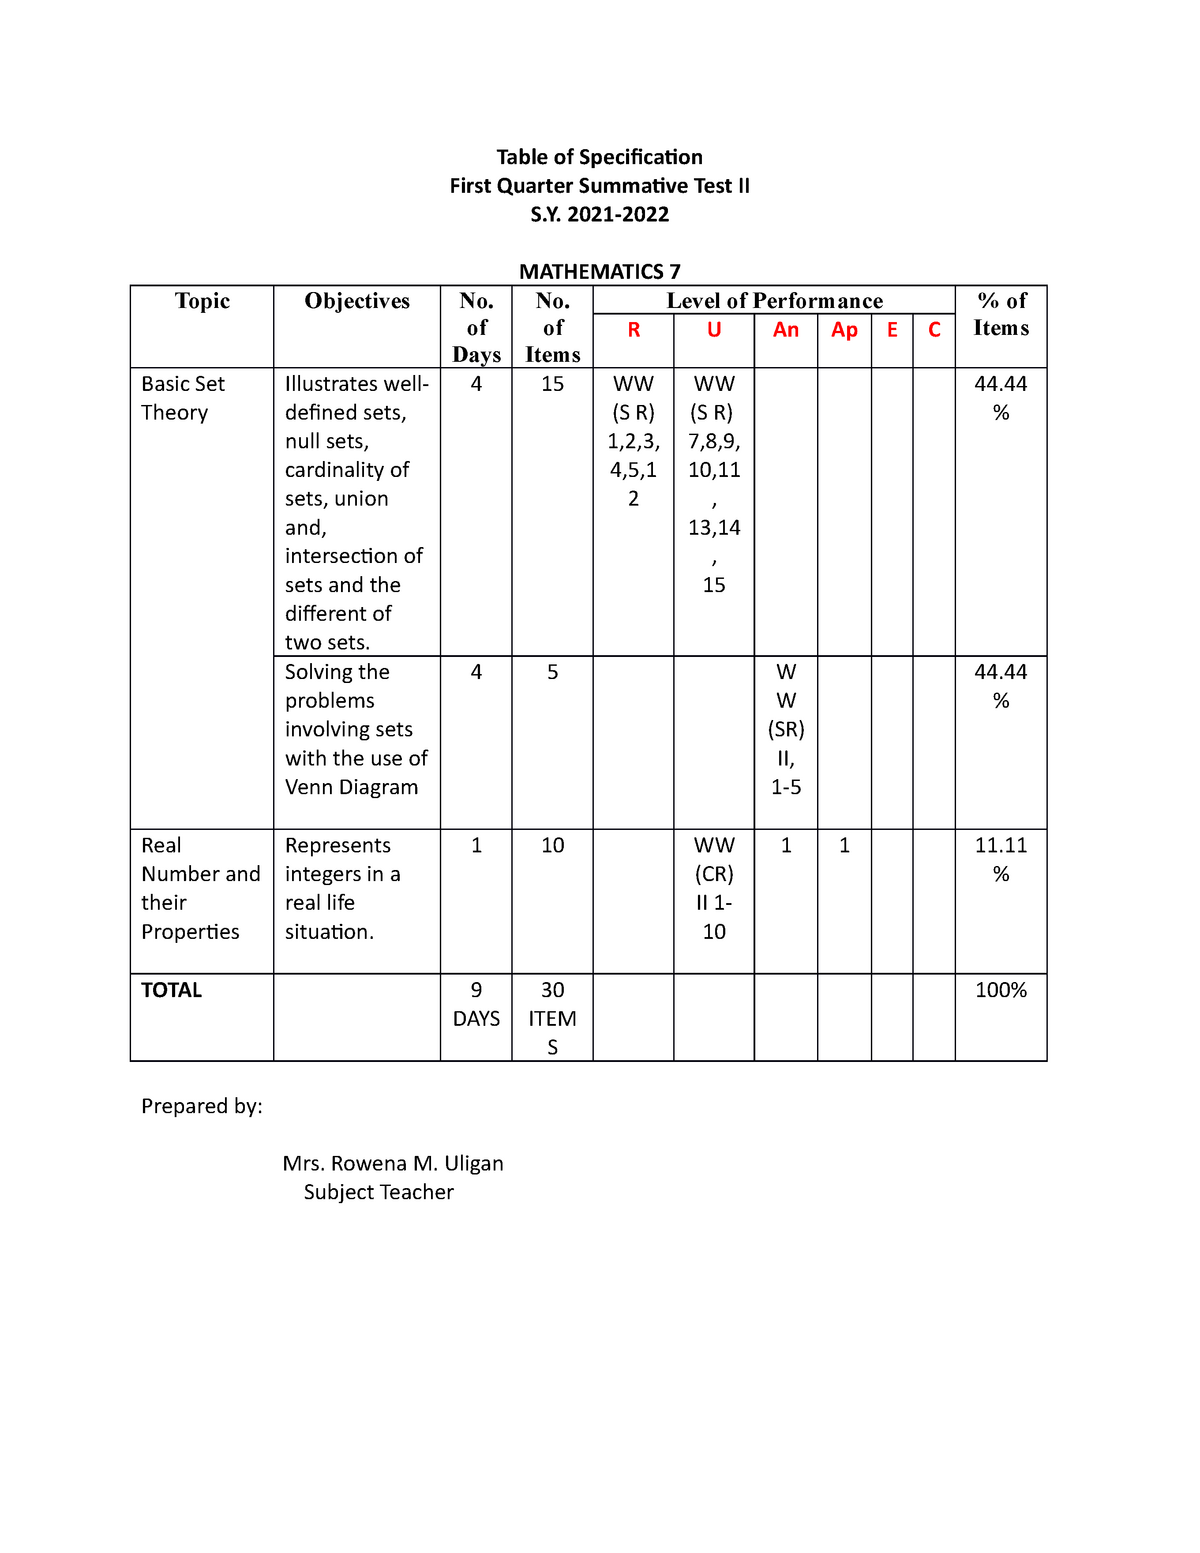 Tos Math St Quarter Docx Table Of Specification Tos General | My XXX ...